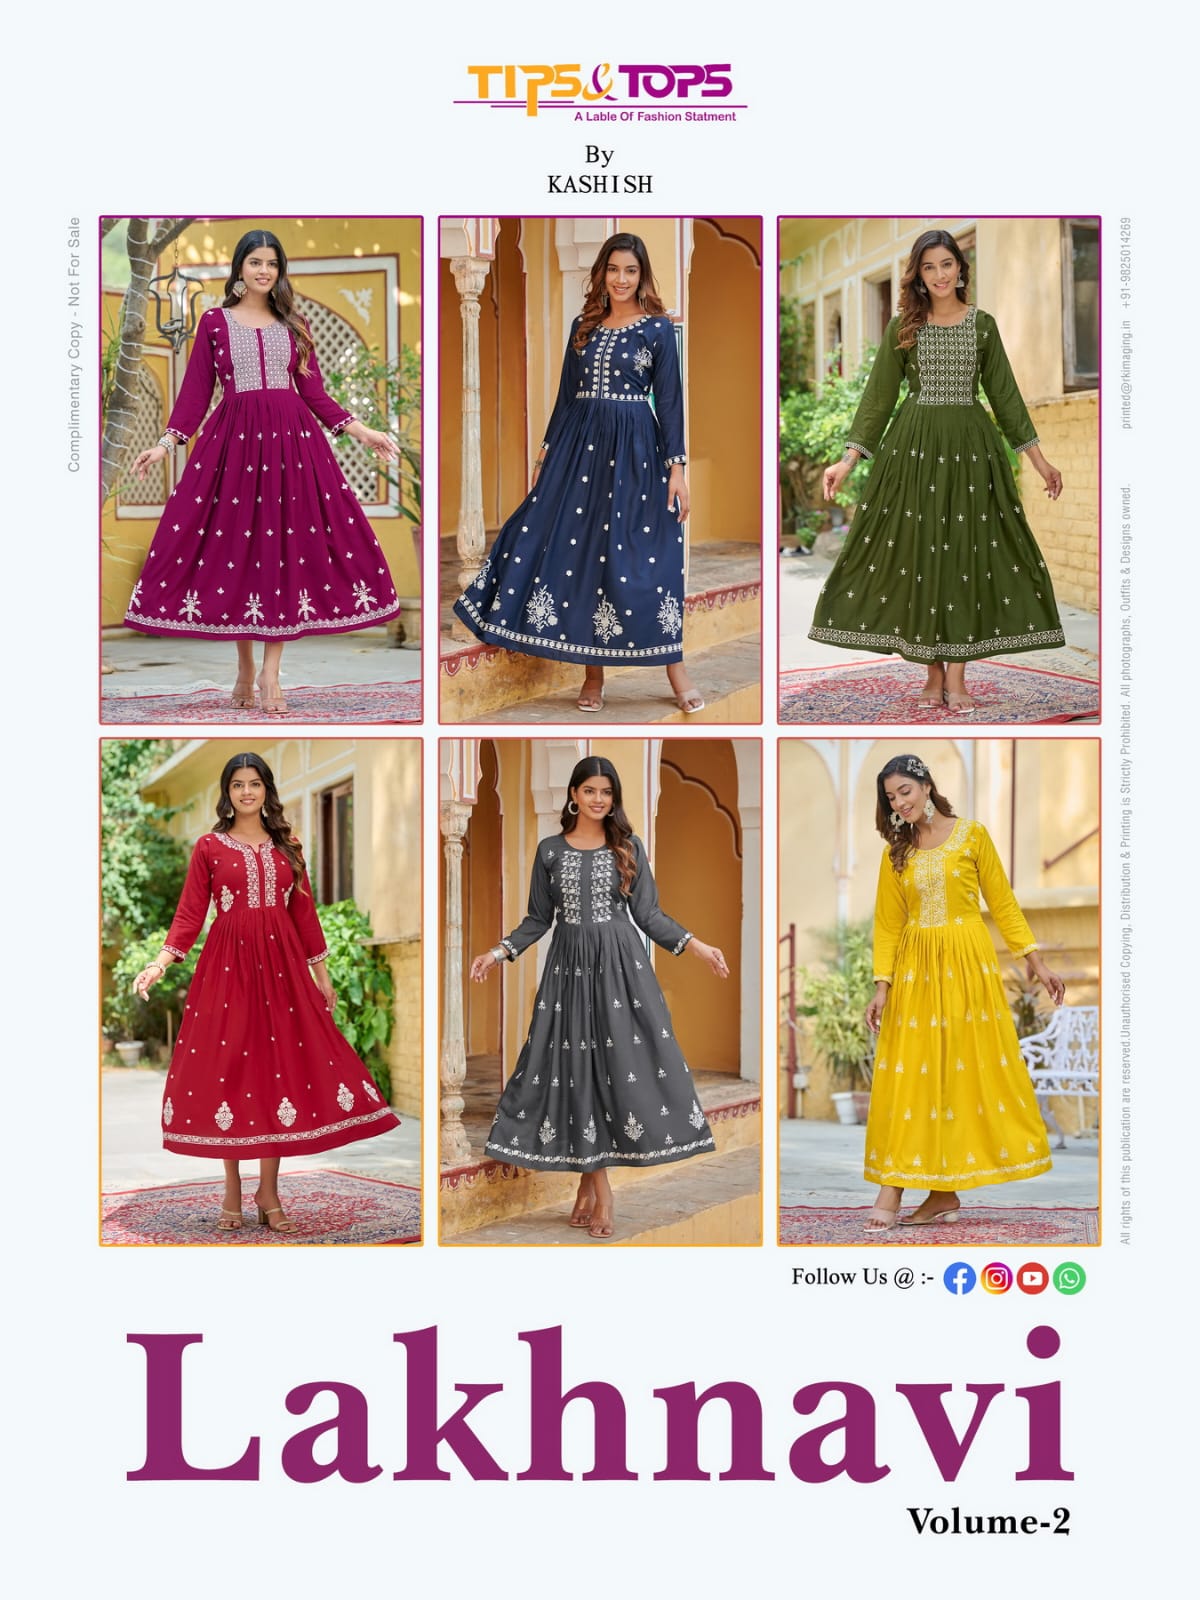 Tips And Tops Lakhnavi Vol 2 collection 7